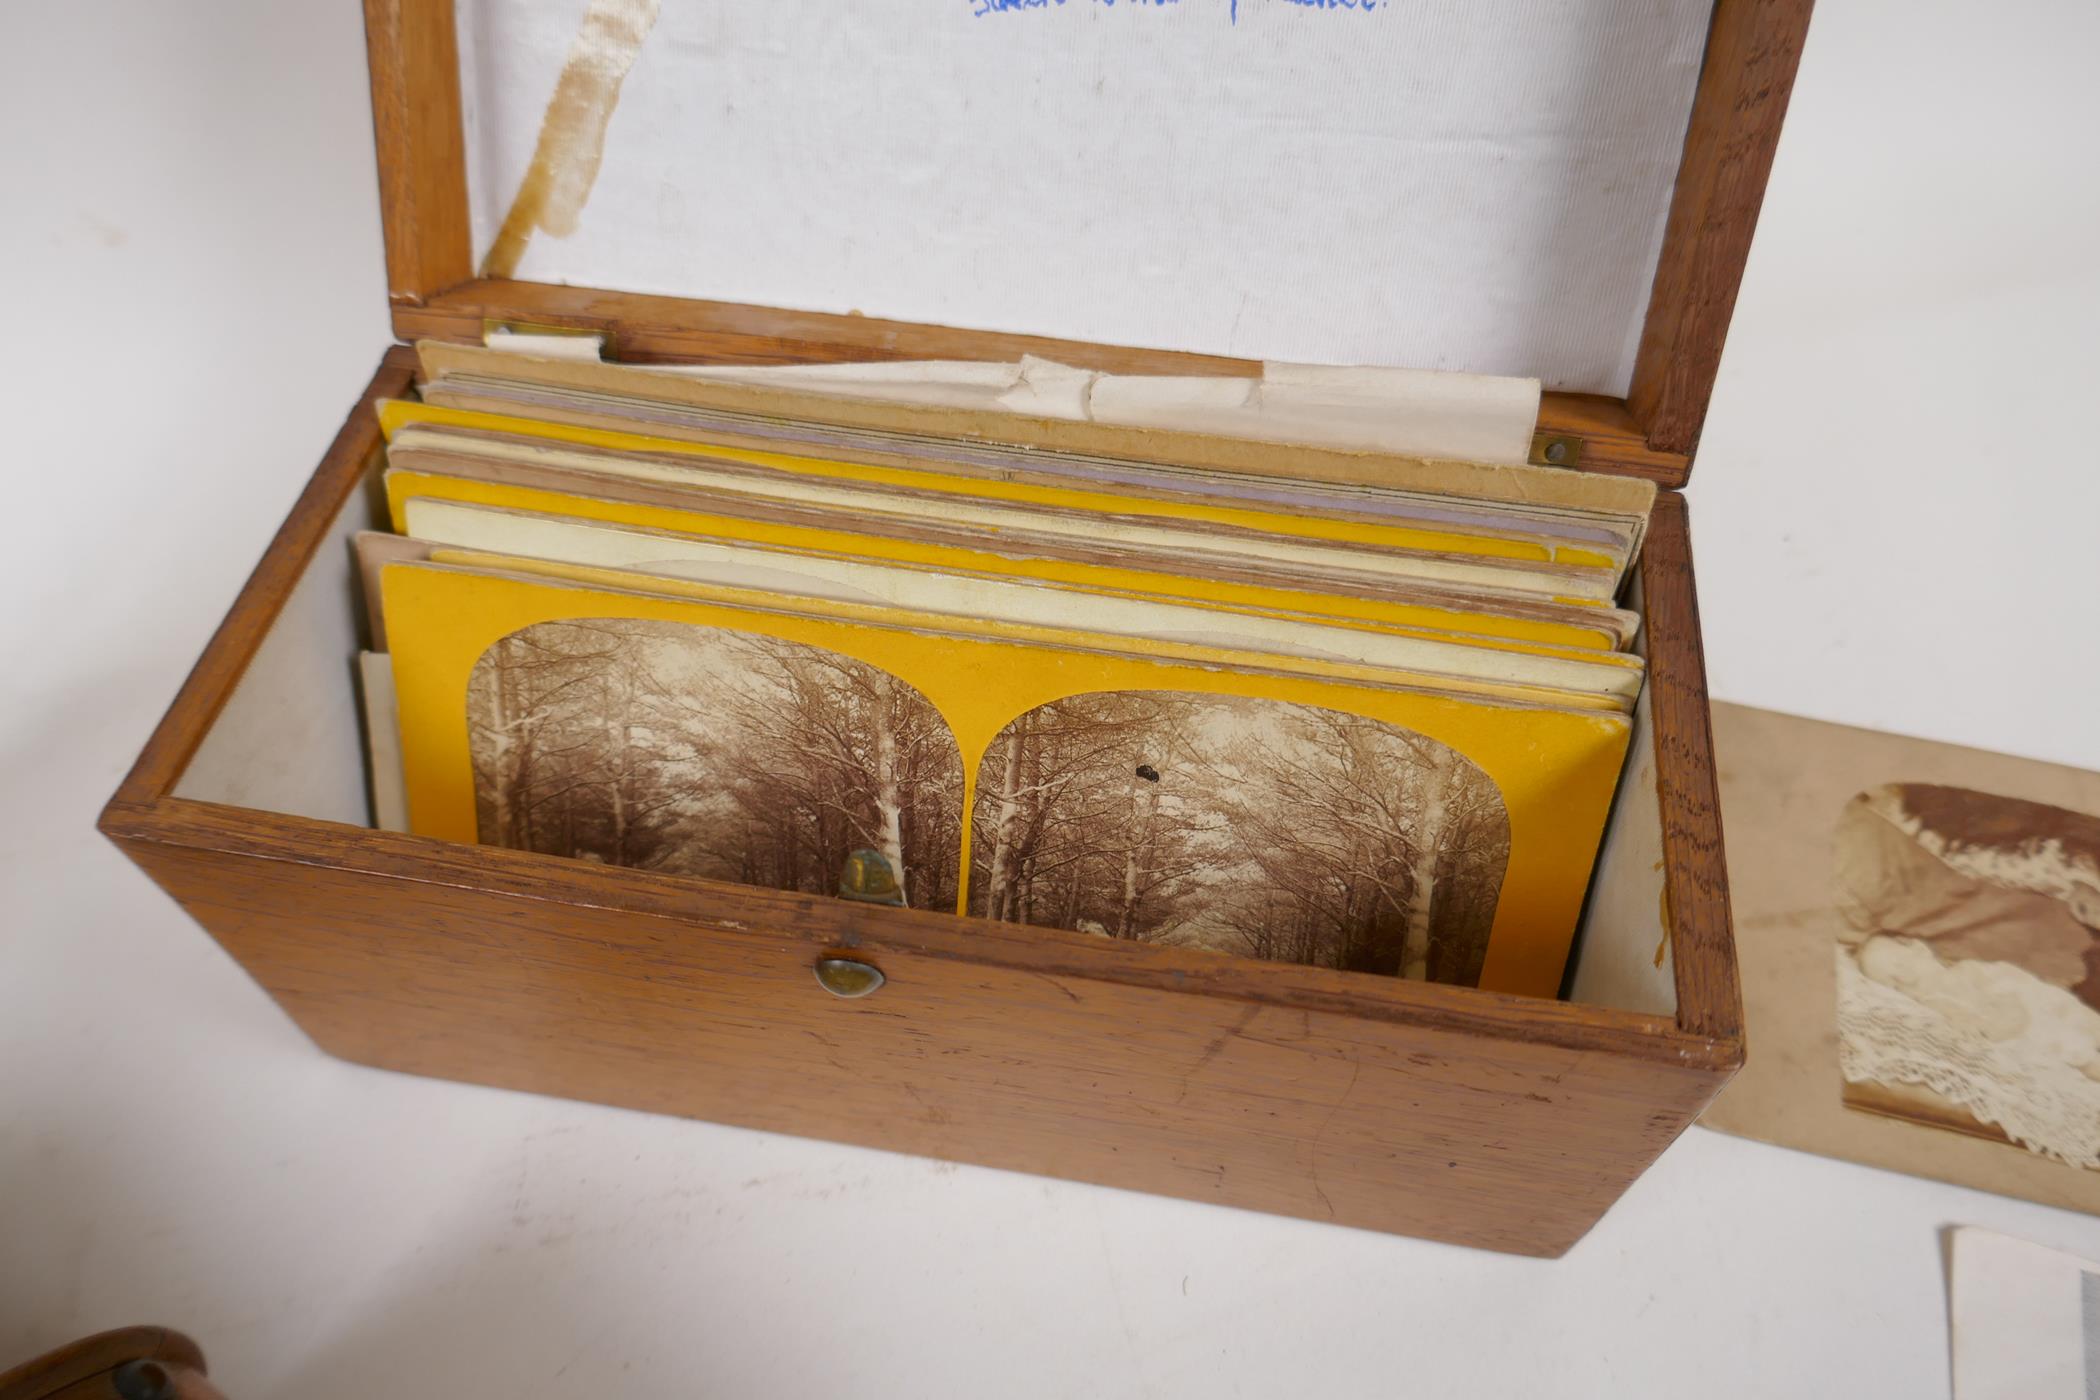 An early C20th stereoscopic viewer, and a boxed collection of viewer cards depicting various - Image 6 of 6